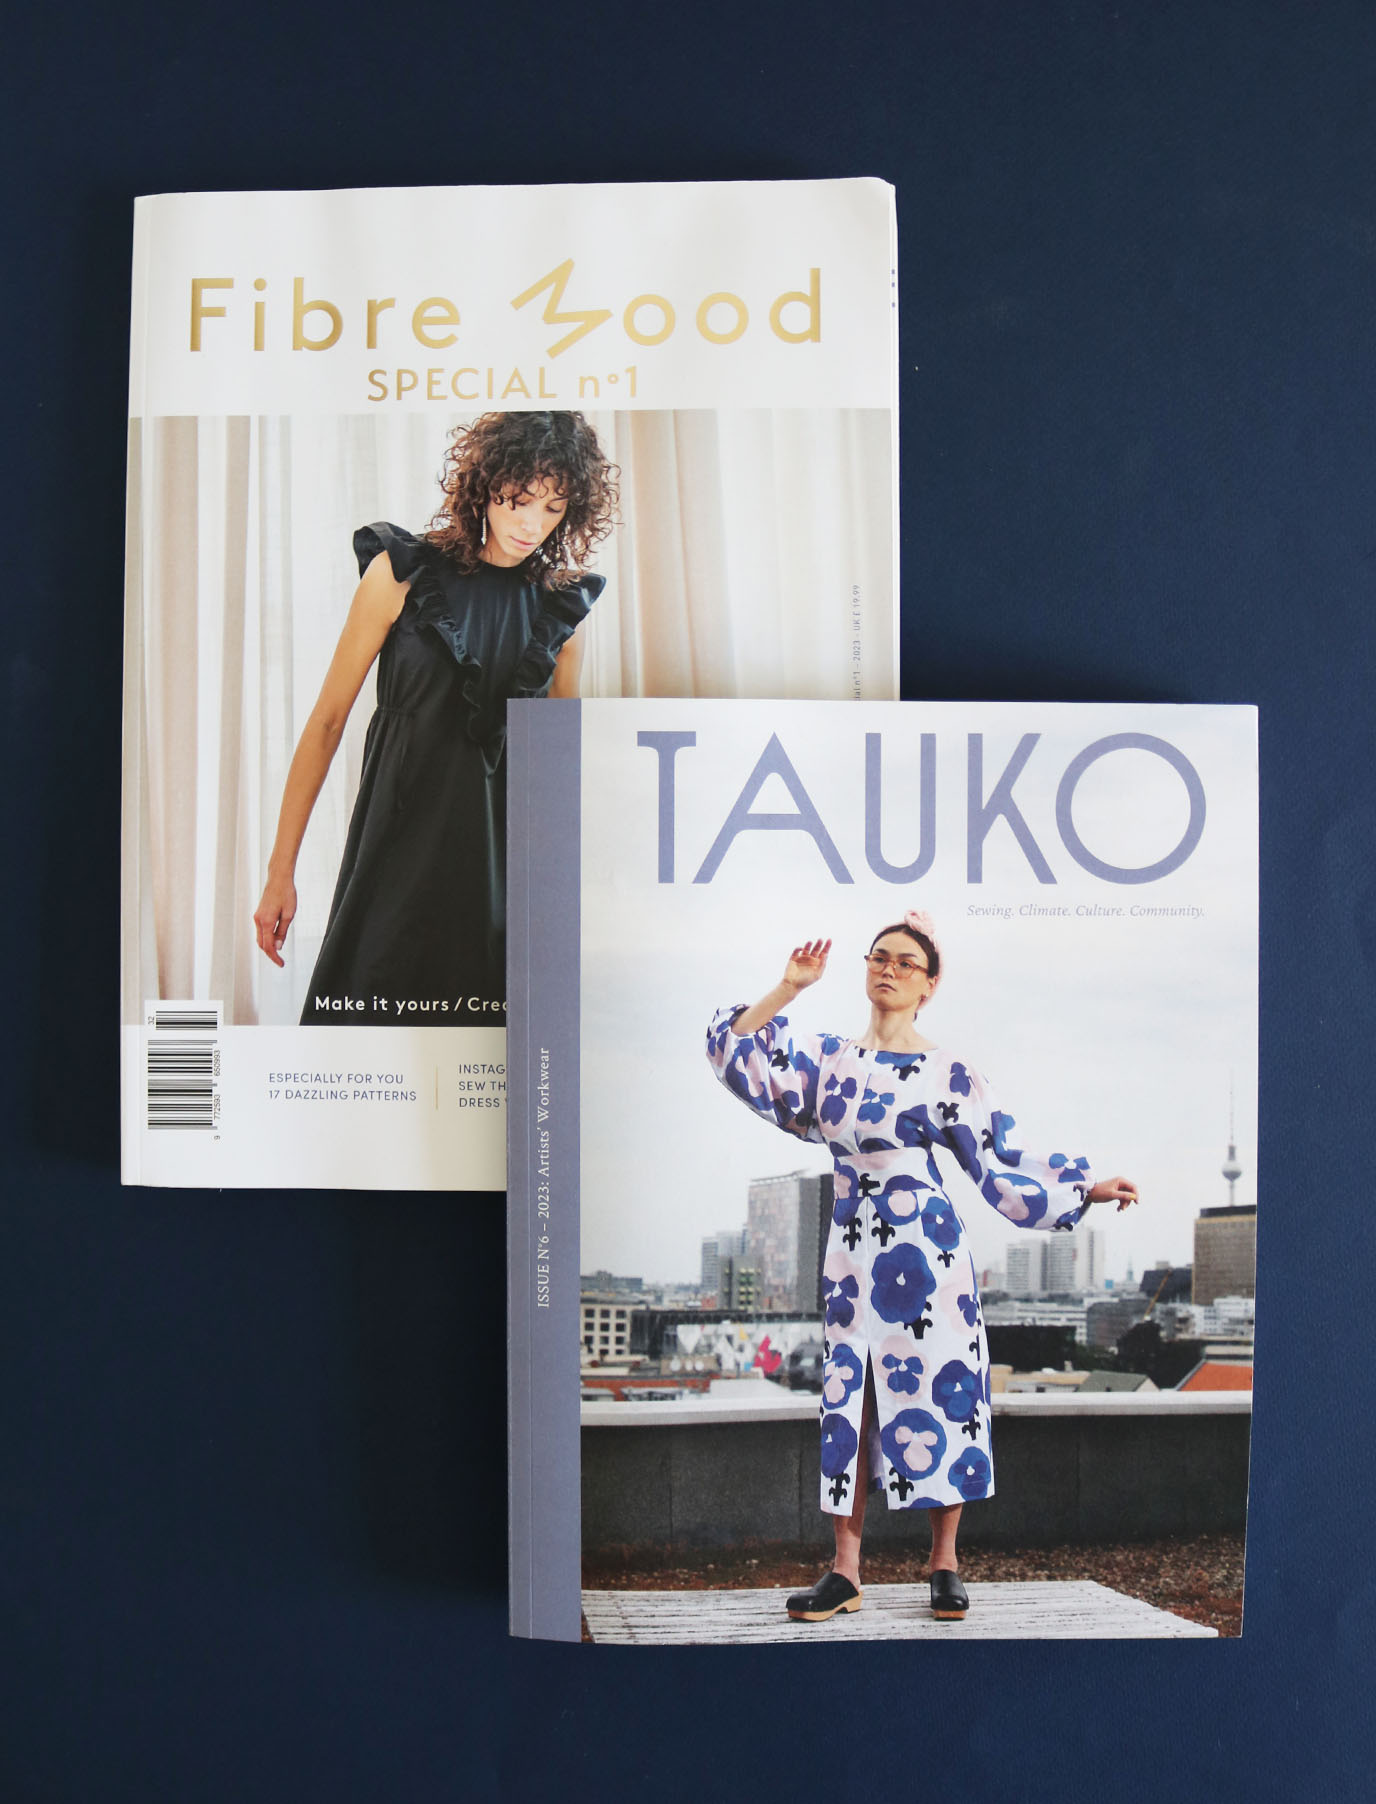 Fibre Mood and Tauko are two of the most popular sewing pattern magazines on the market and make the perfect gift. Fibre Mood Special No. 1 features 17 new patterns and TAUKO Issue No. 6 features 10 more patterns.